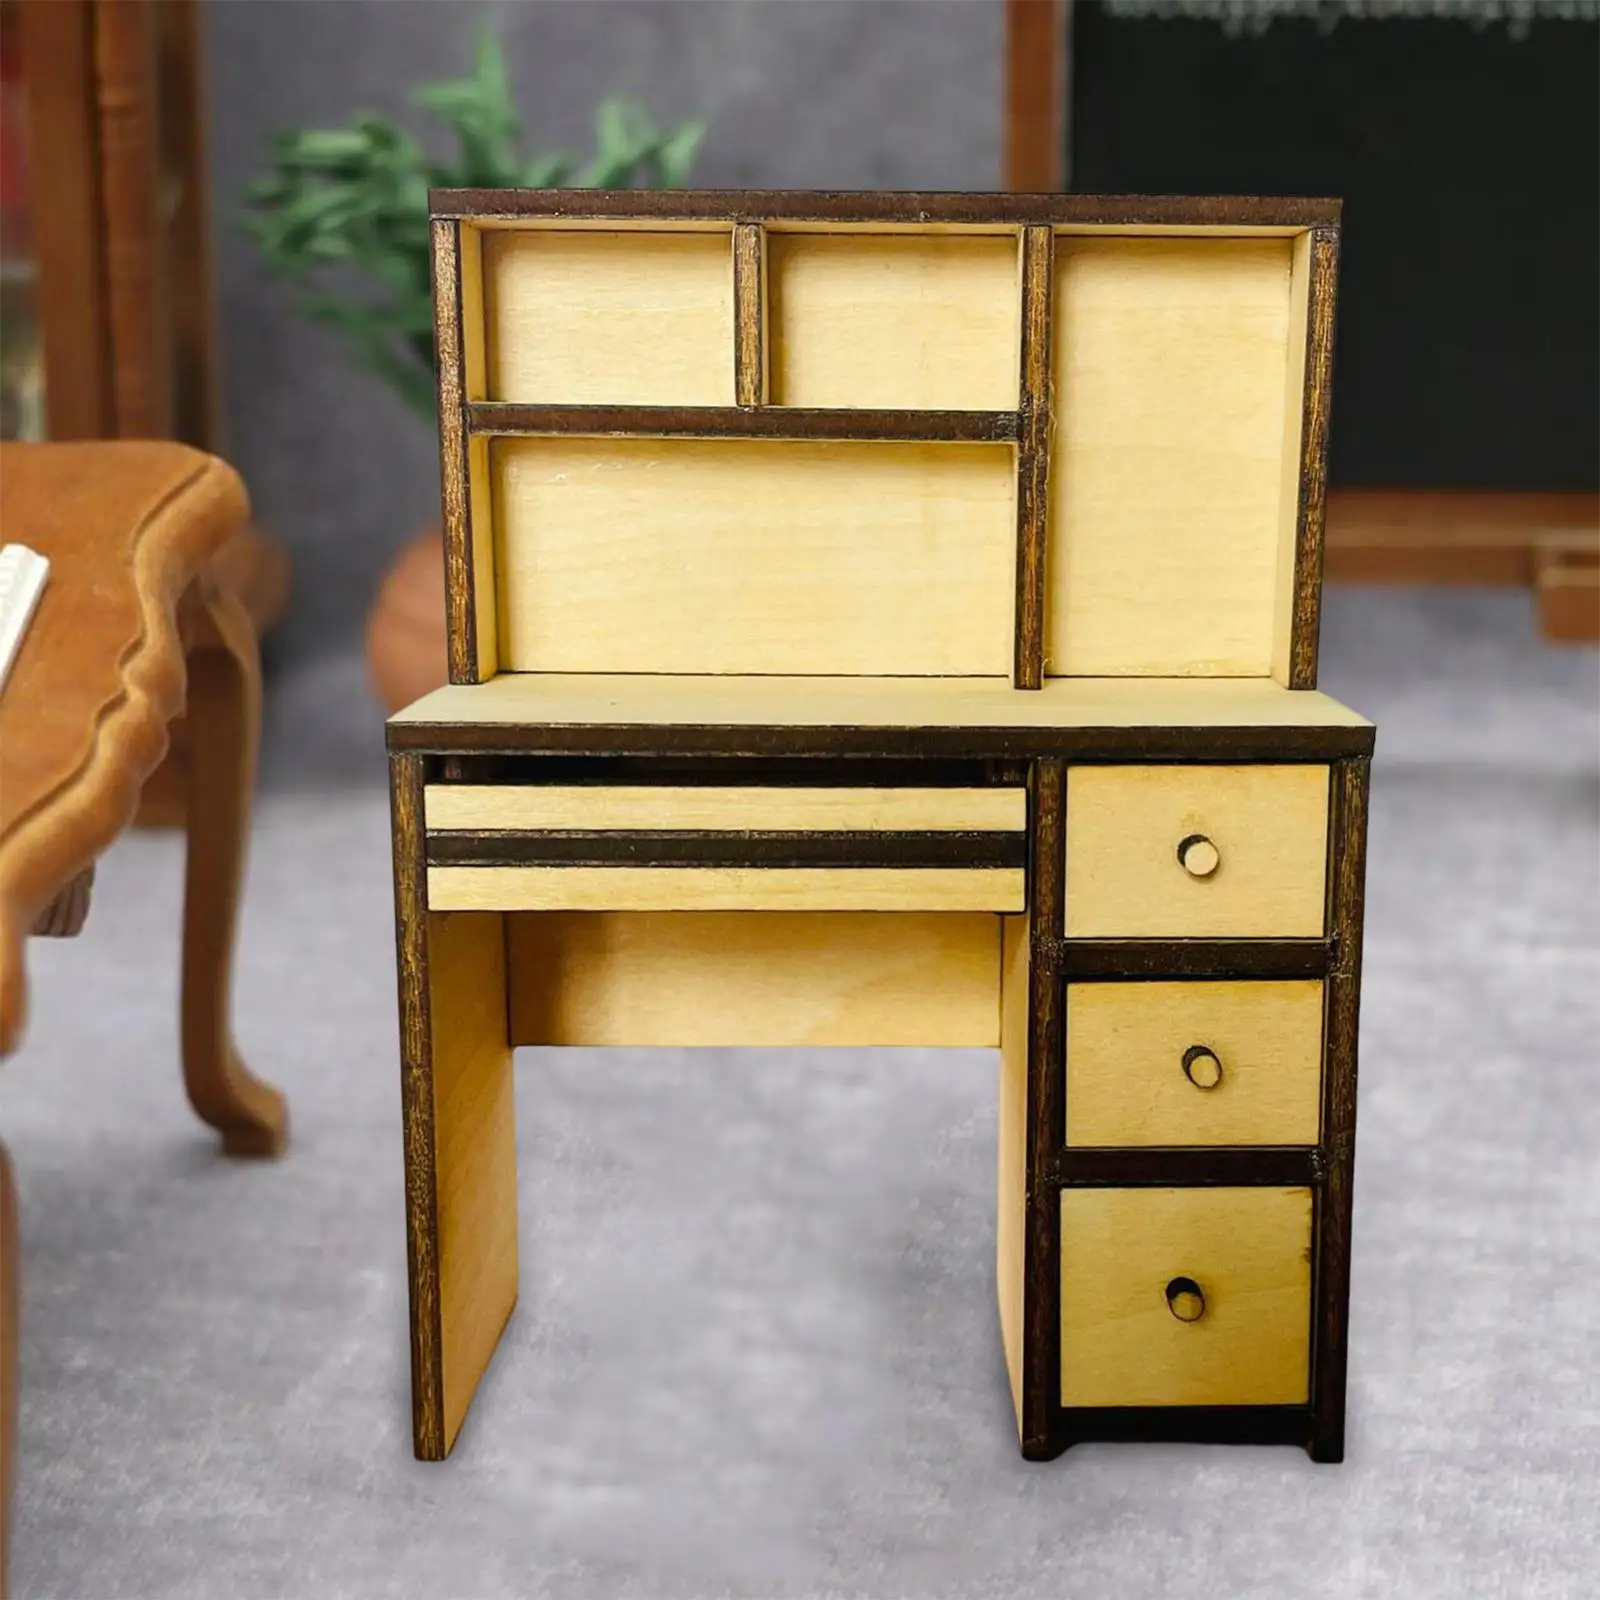 Dollhouse Furnishings Miniature Table DIY Model Simulation Wooden Doll House